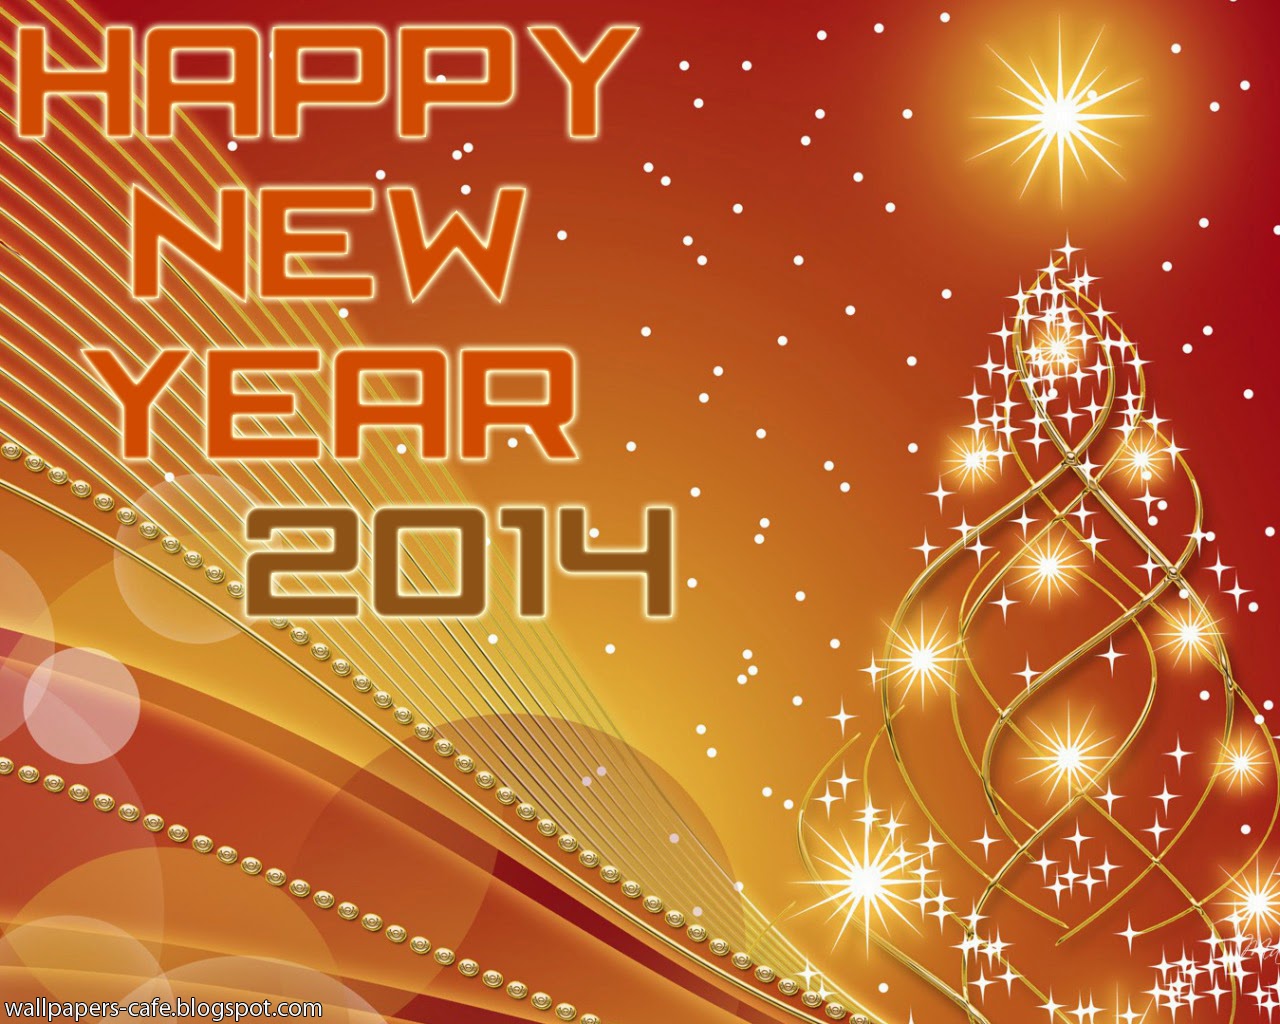 Unique New Year 2014 HD Pictures | Wallpapers Cafe